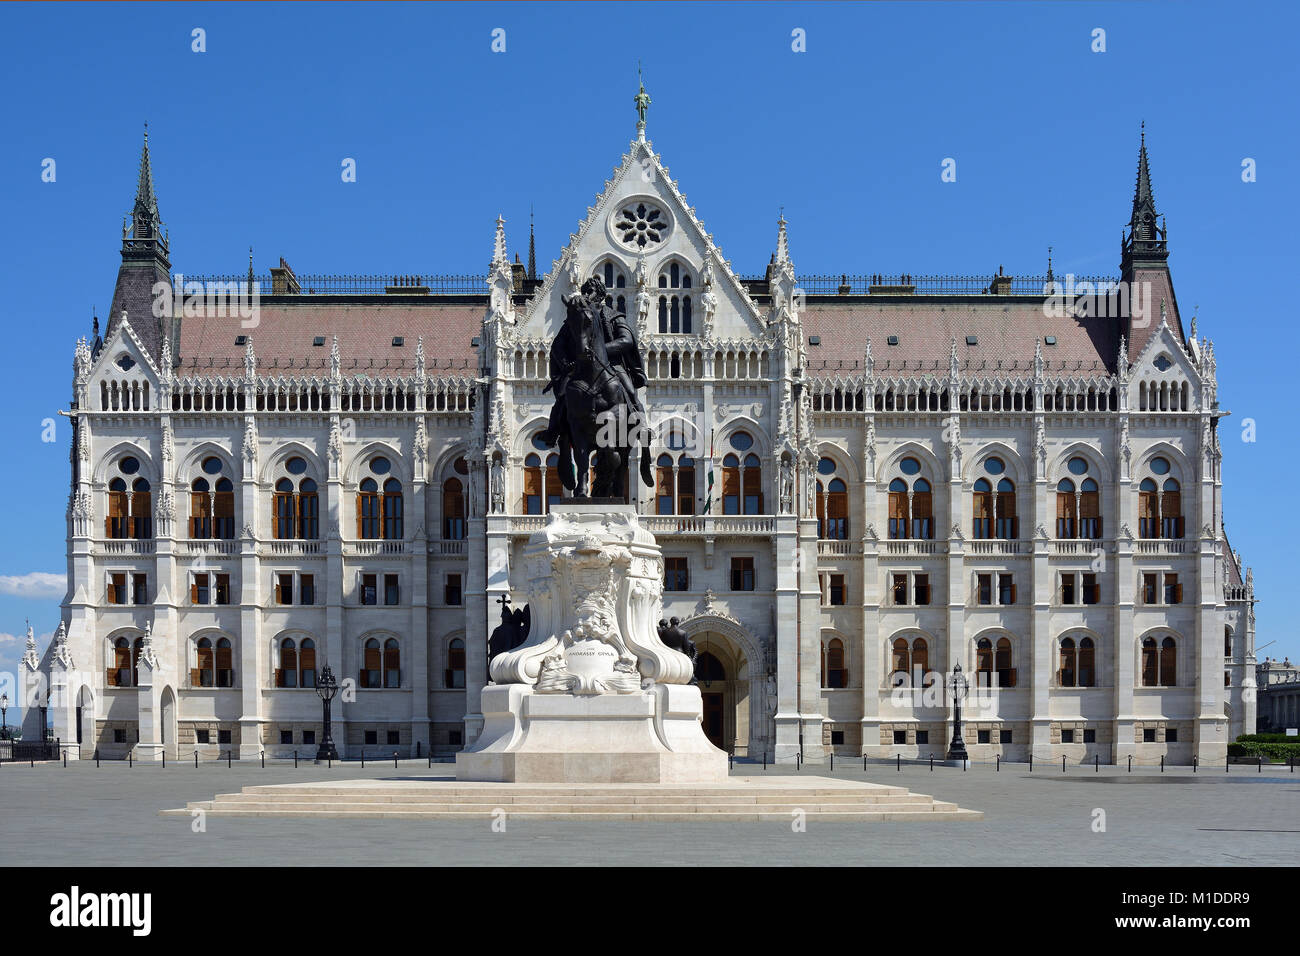 Hungarian Parliament building on the bank of the river Danube in Budapest with Equestrian statue of Andrassy - Hungary. Stock Photo